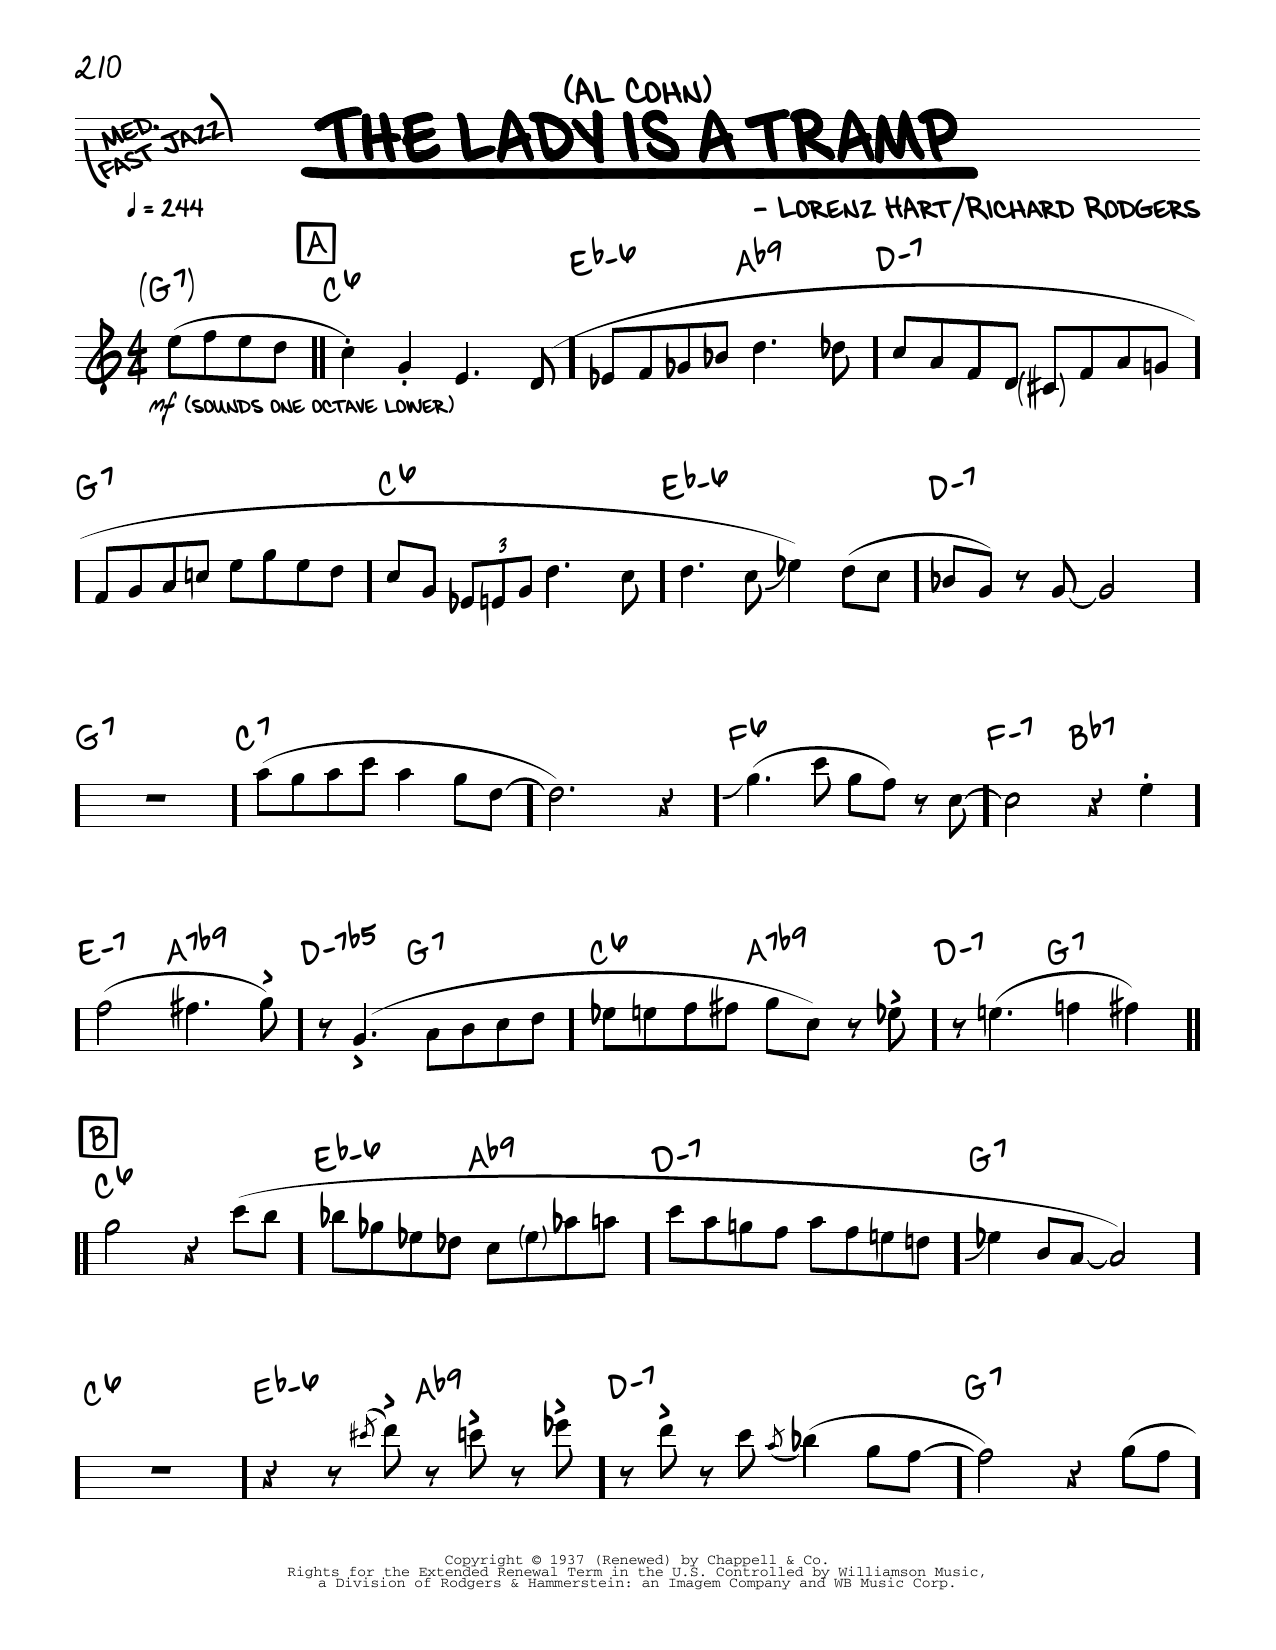 Download Al Cohn The Lady Is A Tramp Sheet Music